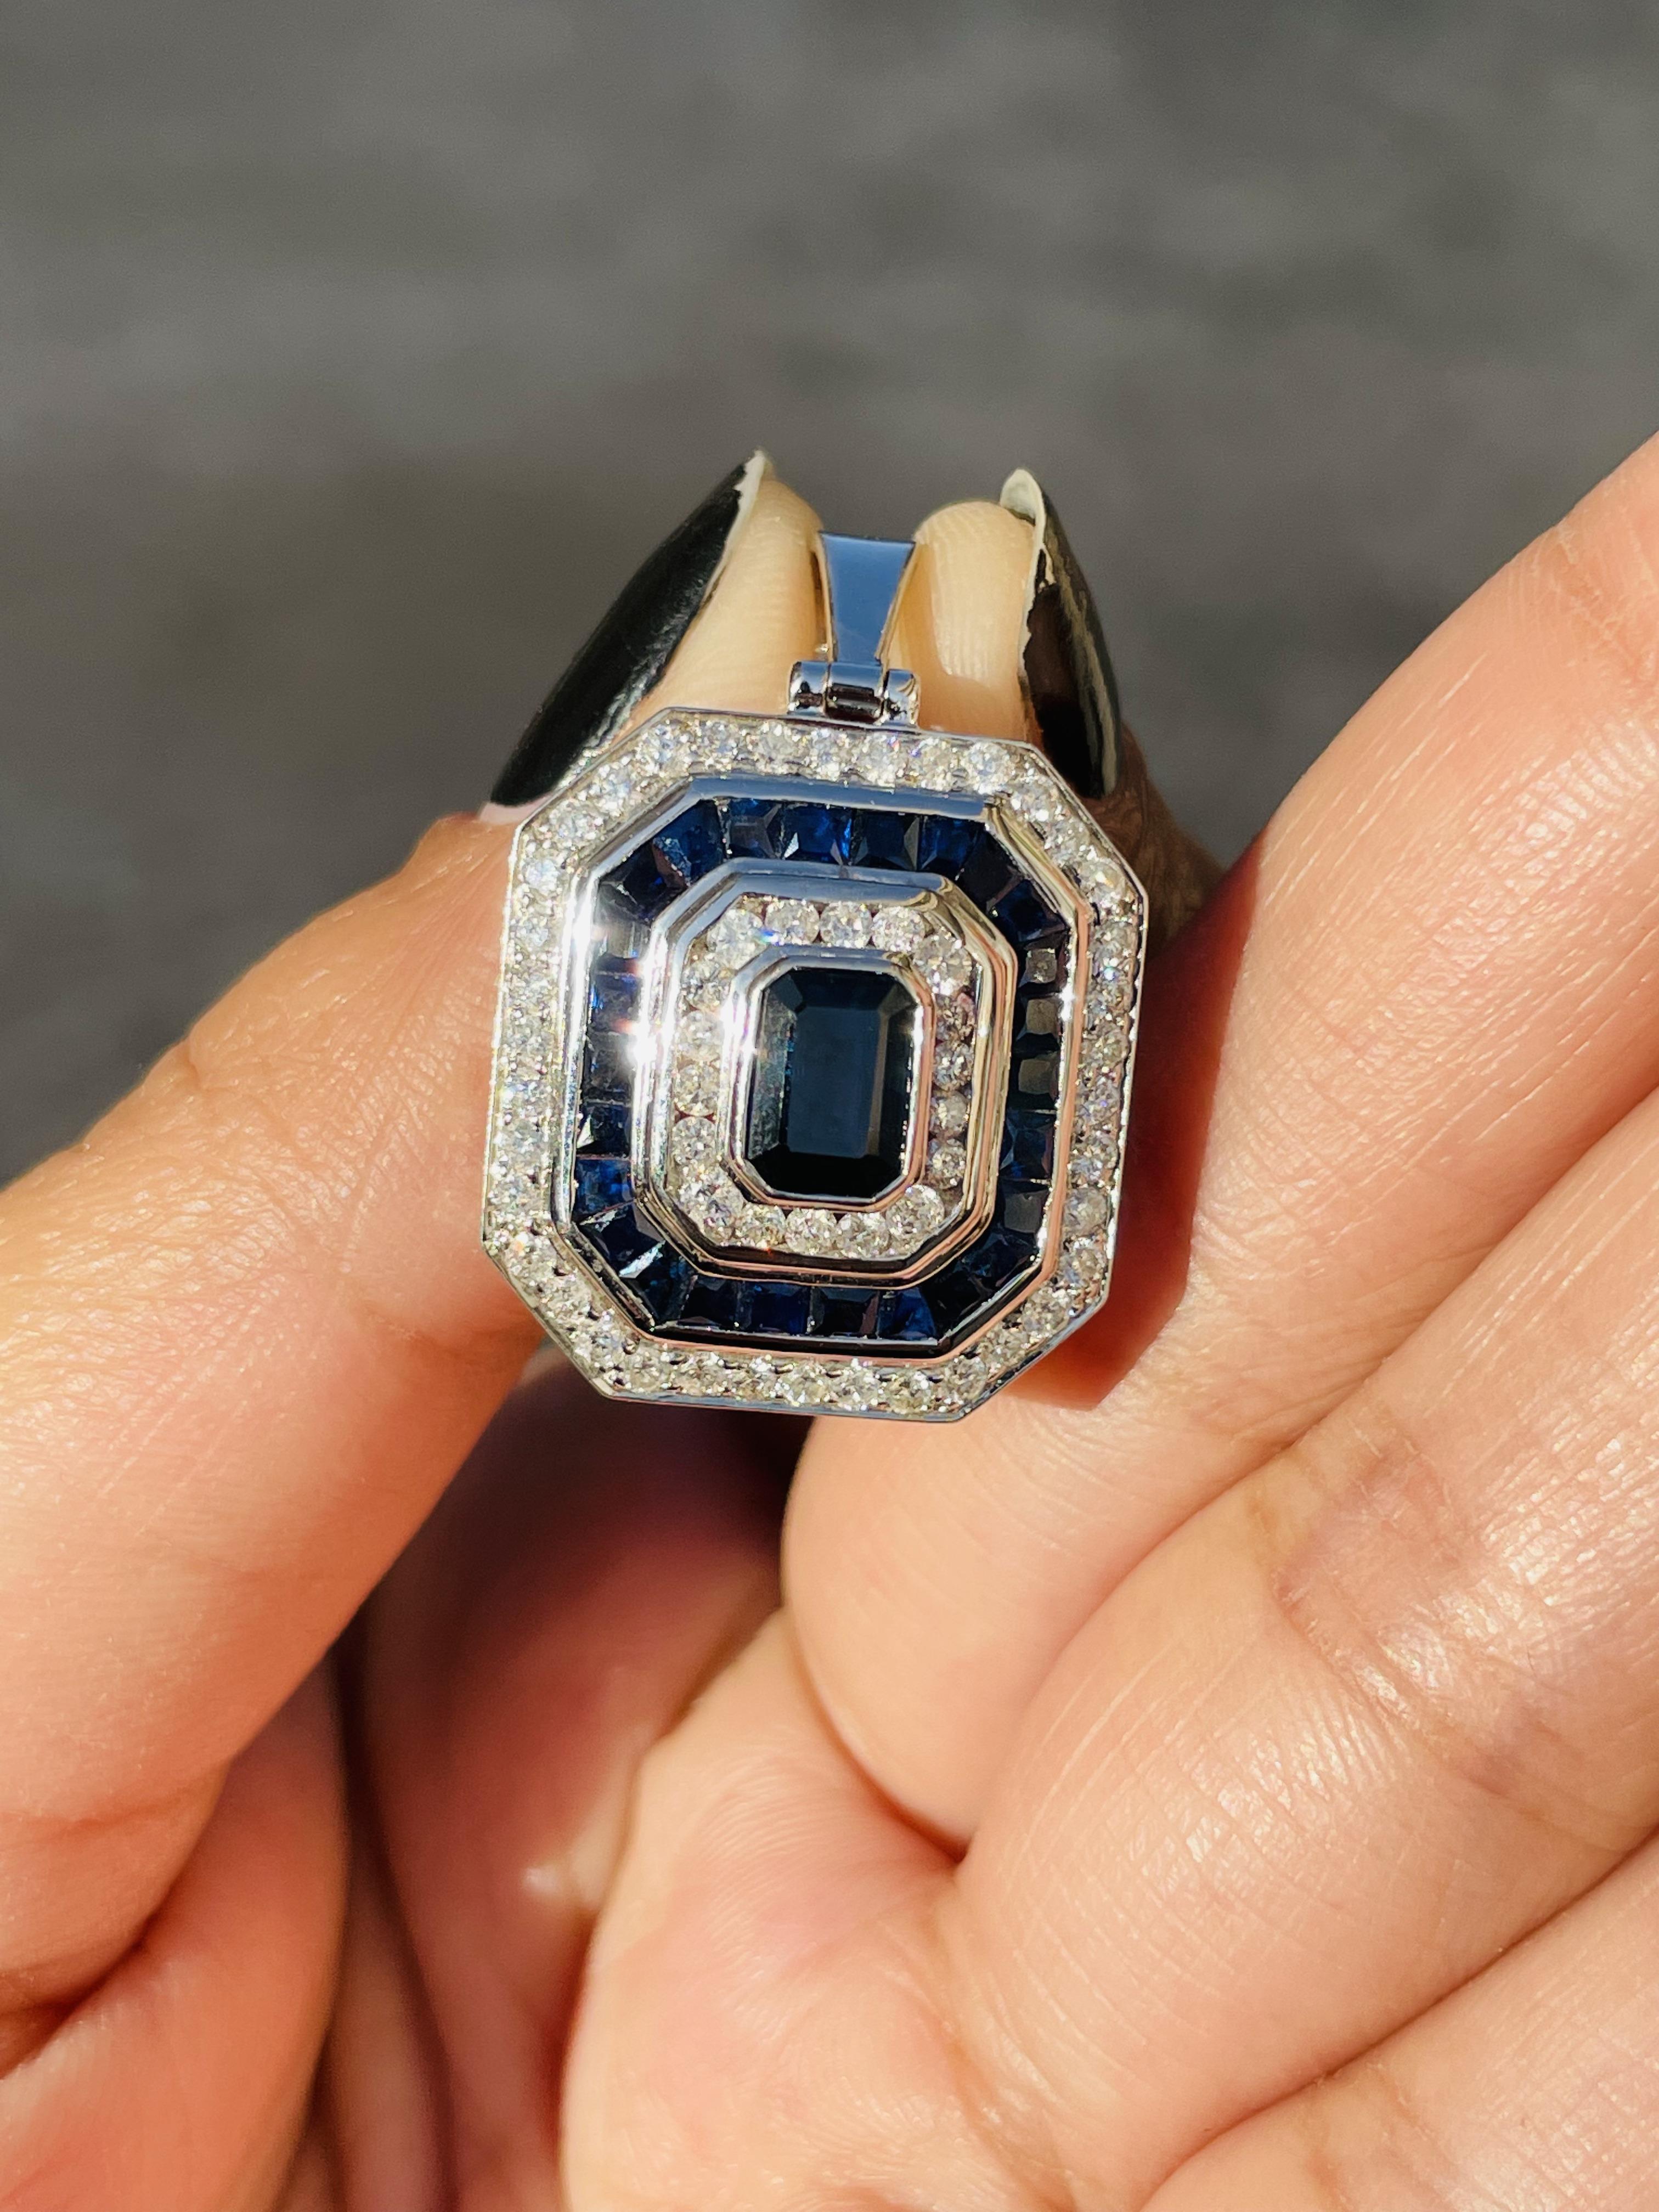 Blue Sapphire pendant in 18K Gold. It has a octagon cut sapphire studded with diamonds that completes your look with a decent touch. Pendants are used to wear or gifted to represent love and promises. It's an attractive jewelry piece that goes with